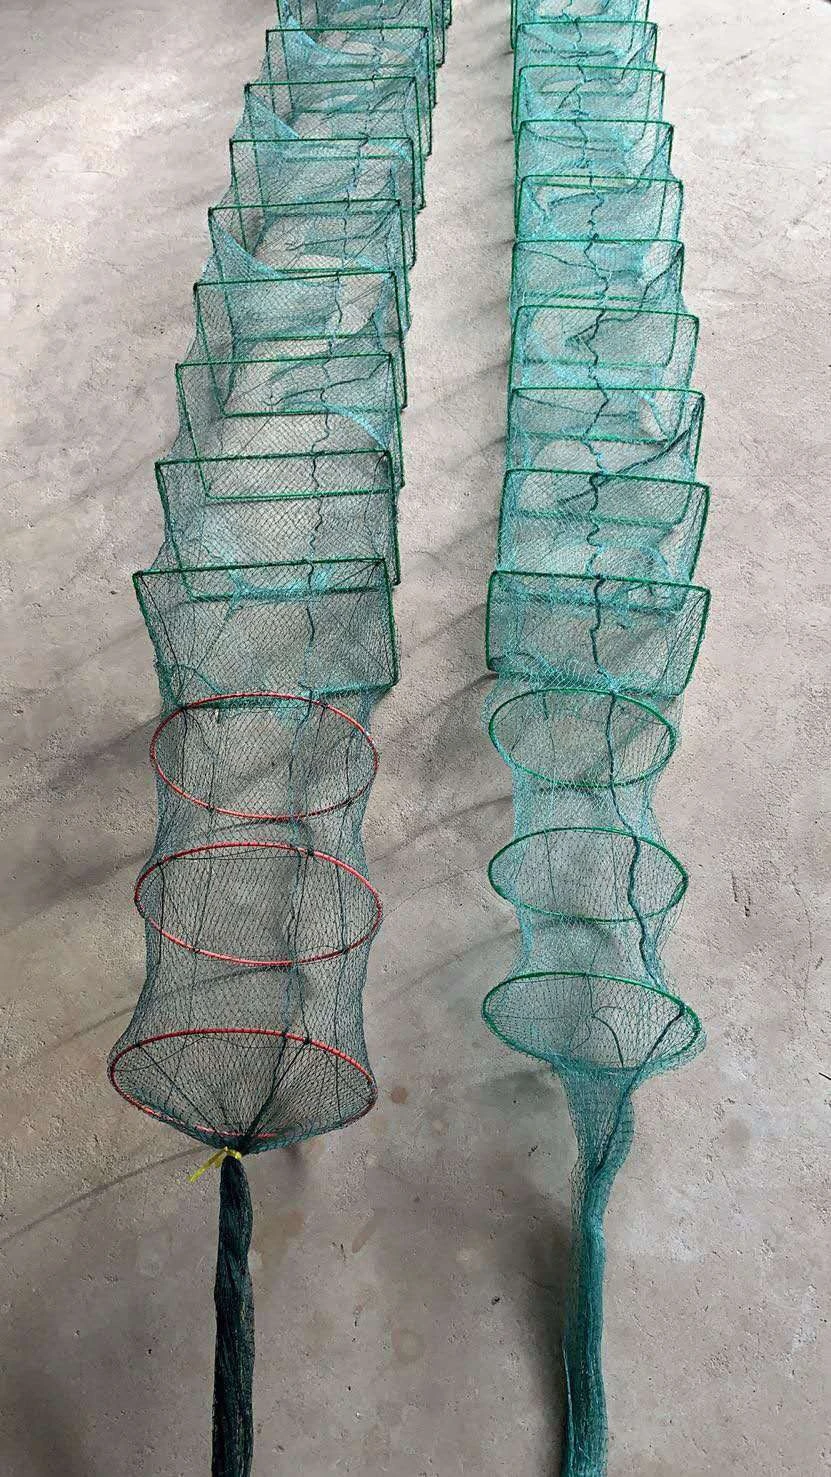 https://img2.tradewheel.com/uploads/images/products/5/3/china-supplier-hot-sale-fishing-net-fishing-trap-for-catching-lobster-fish-eel-shrimp1-0868600001619005756.jpg.webp